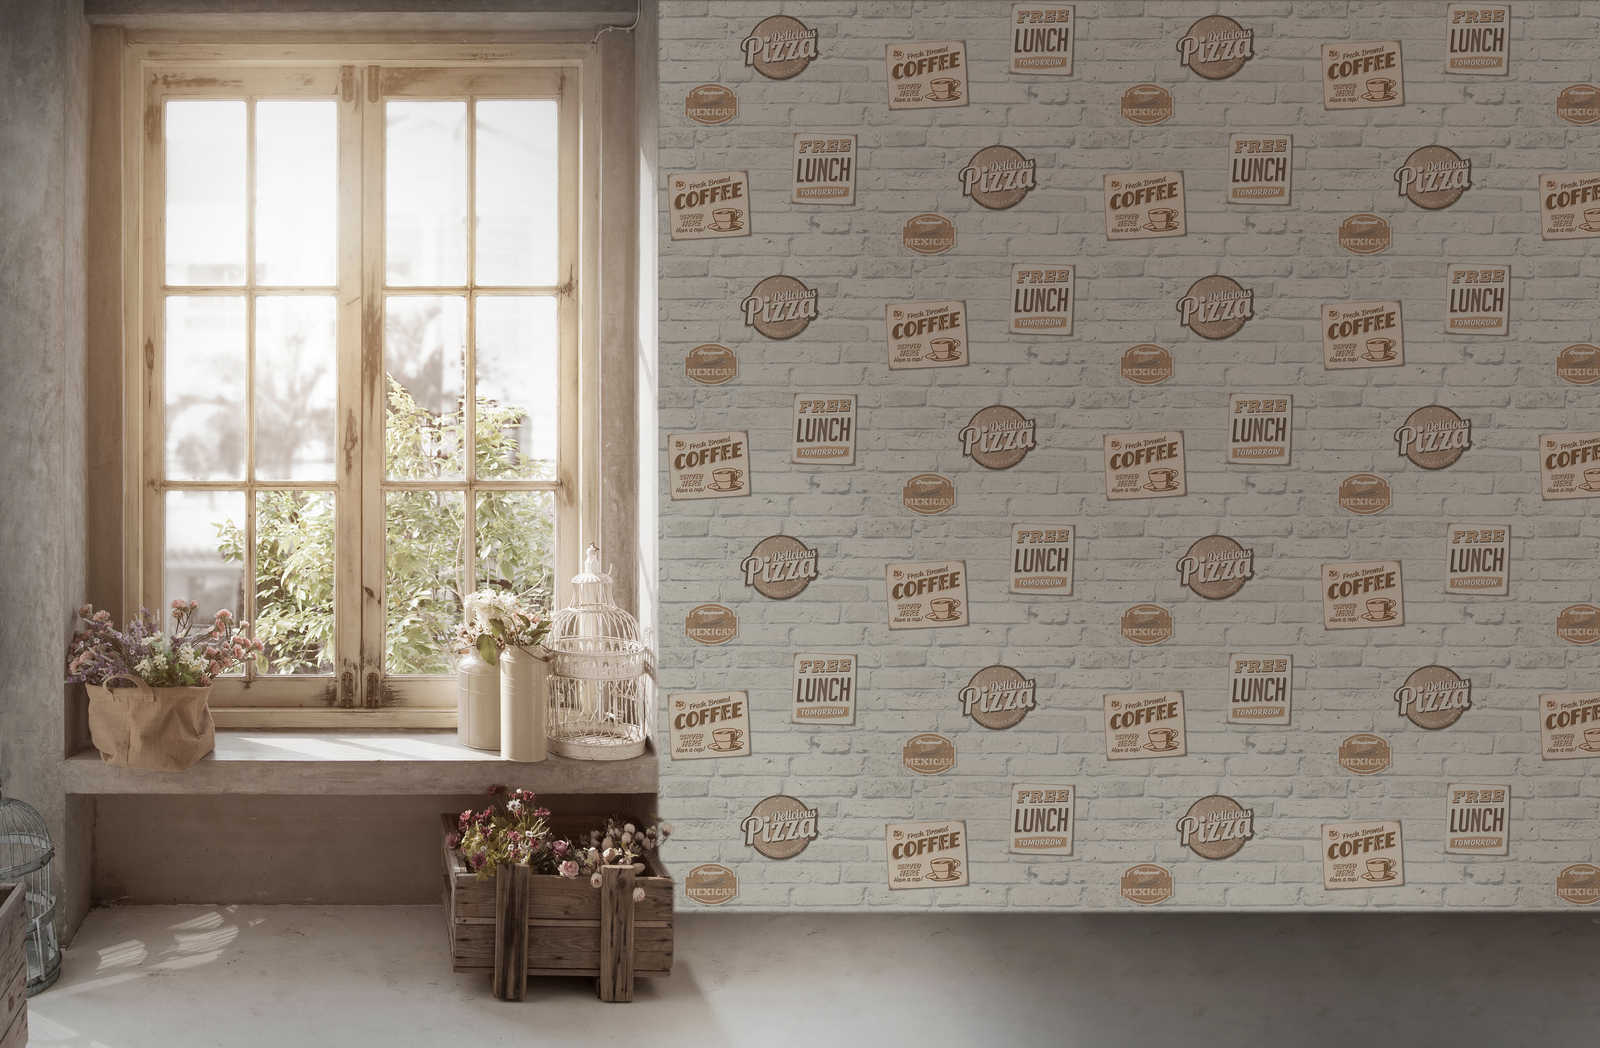             Self-adhesive wallpaper | White brick wall with advertising signs
        